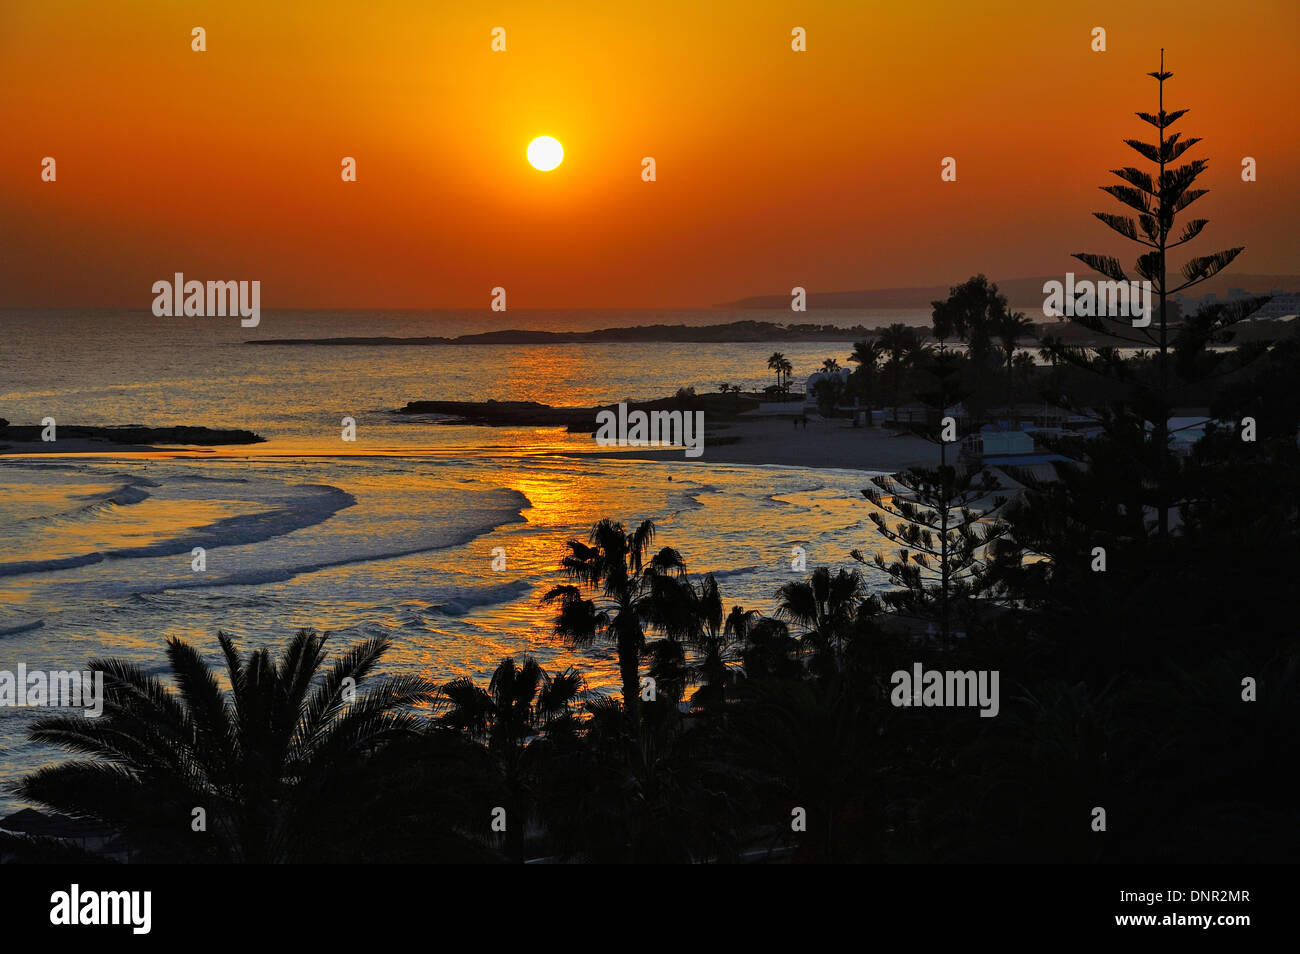 Sunset at the Nissi Beach in Ayia Napa, Cyprus. Stock Photo